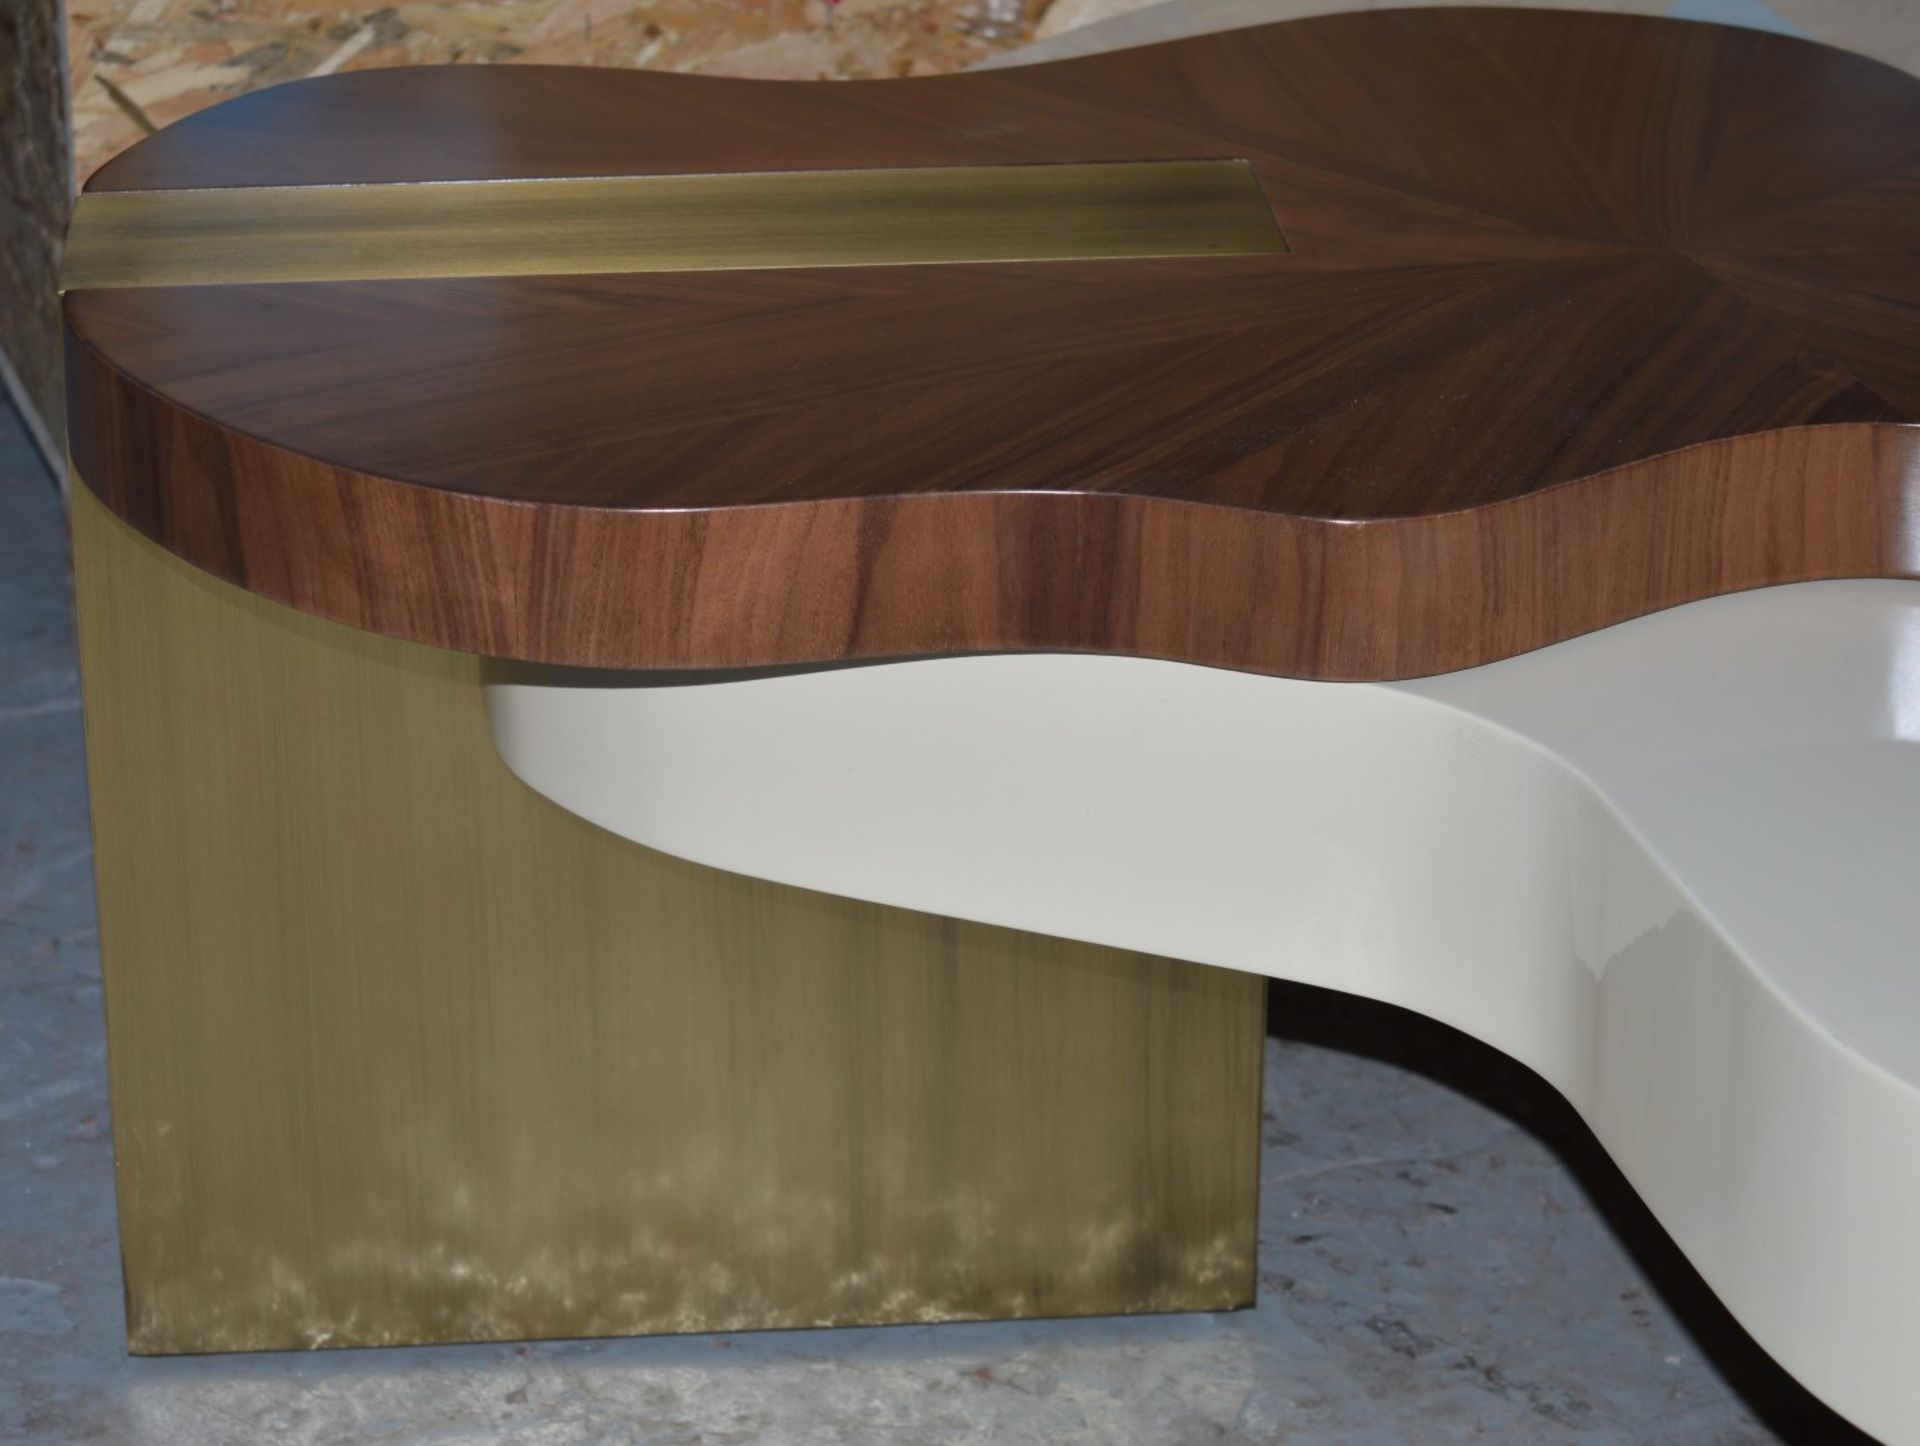 1 x Ginger & Jagger Nenhuphar Coffee Table - Urbanmint Design - Eye Catching Design - Walnut and - Image 4 of 15